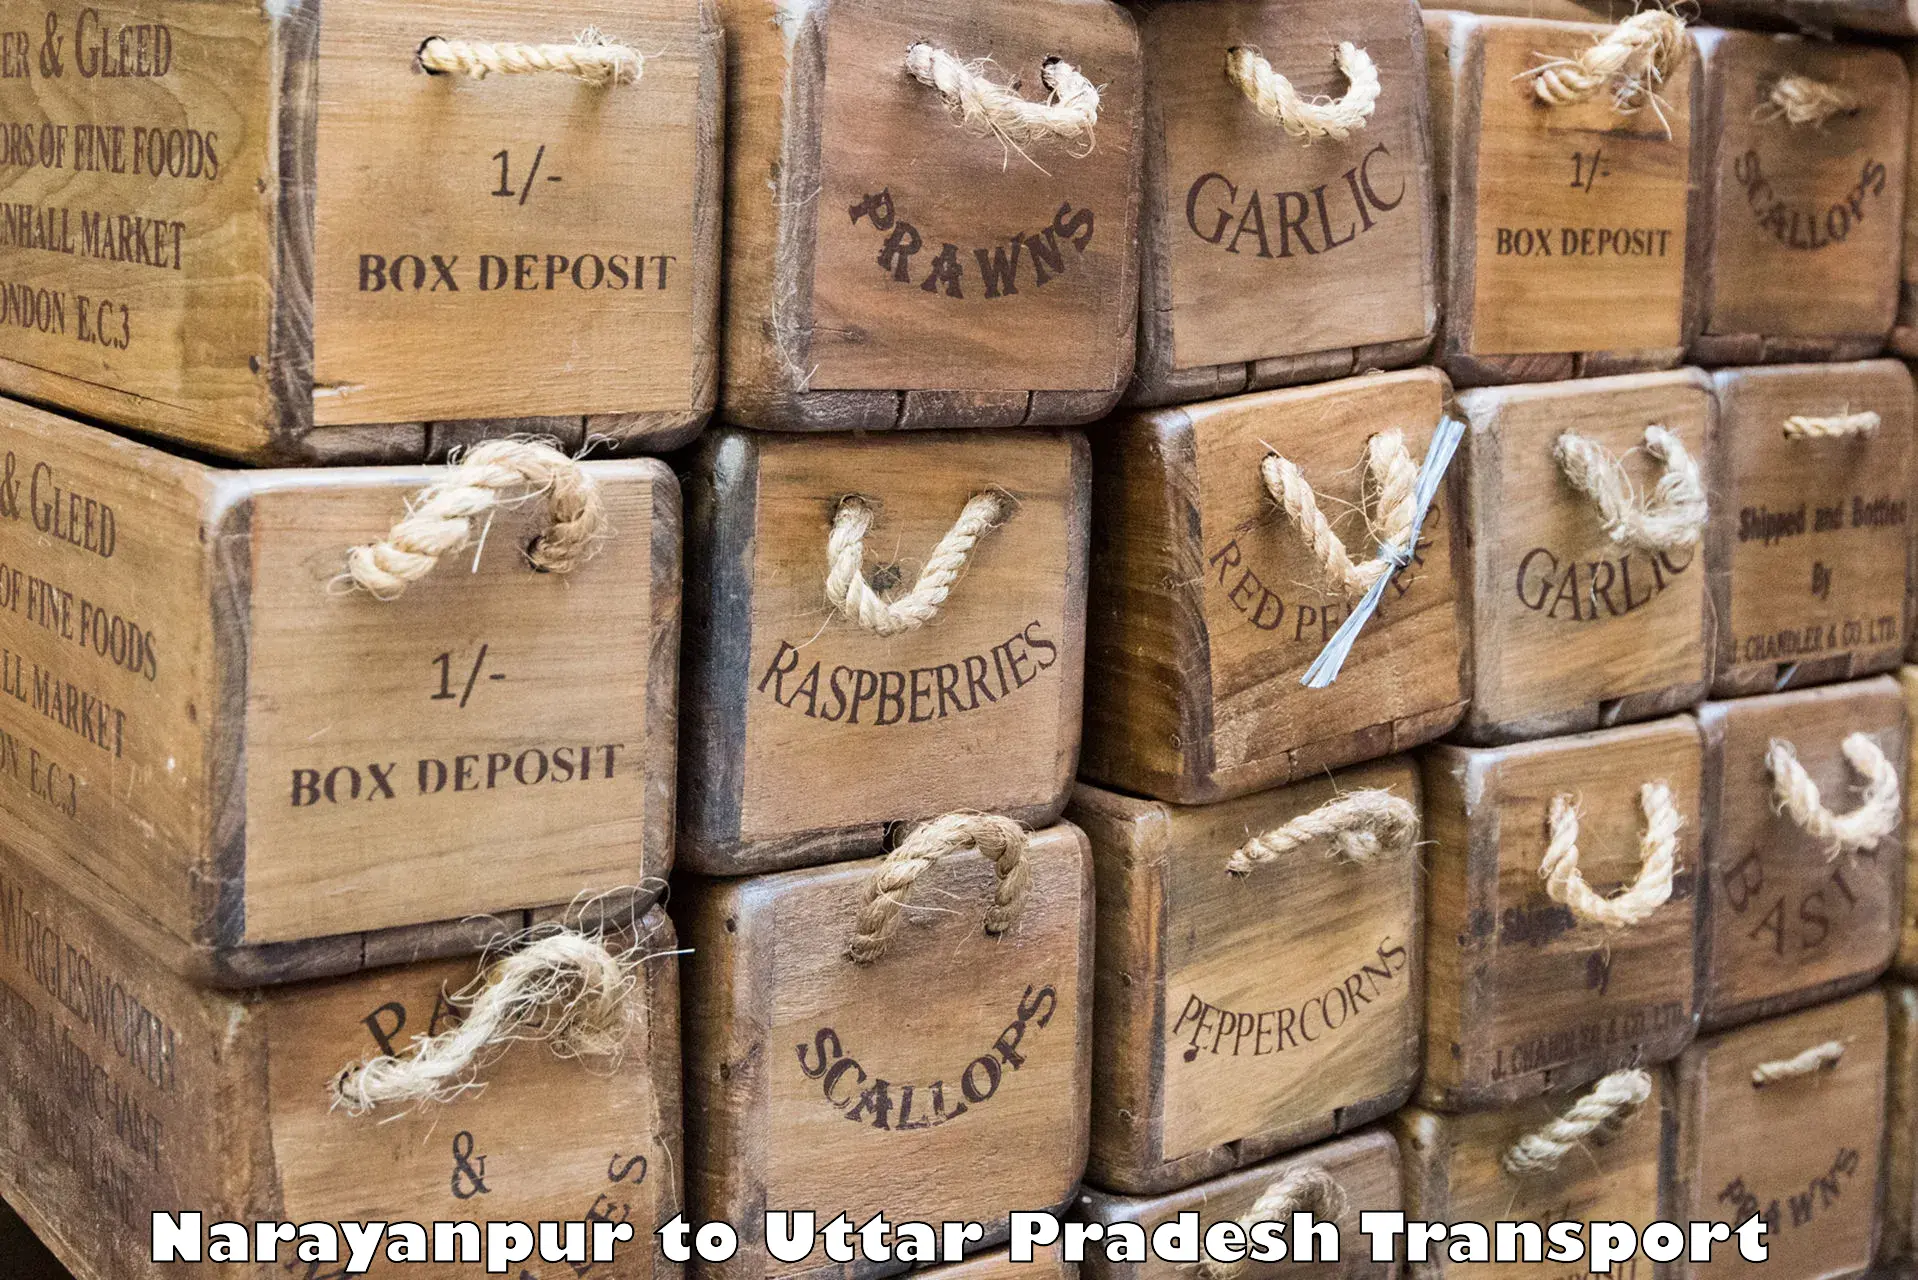 Truck transport companies in India in Narayanpur to Kanpur